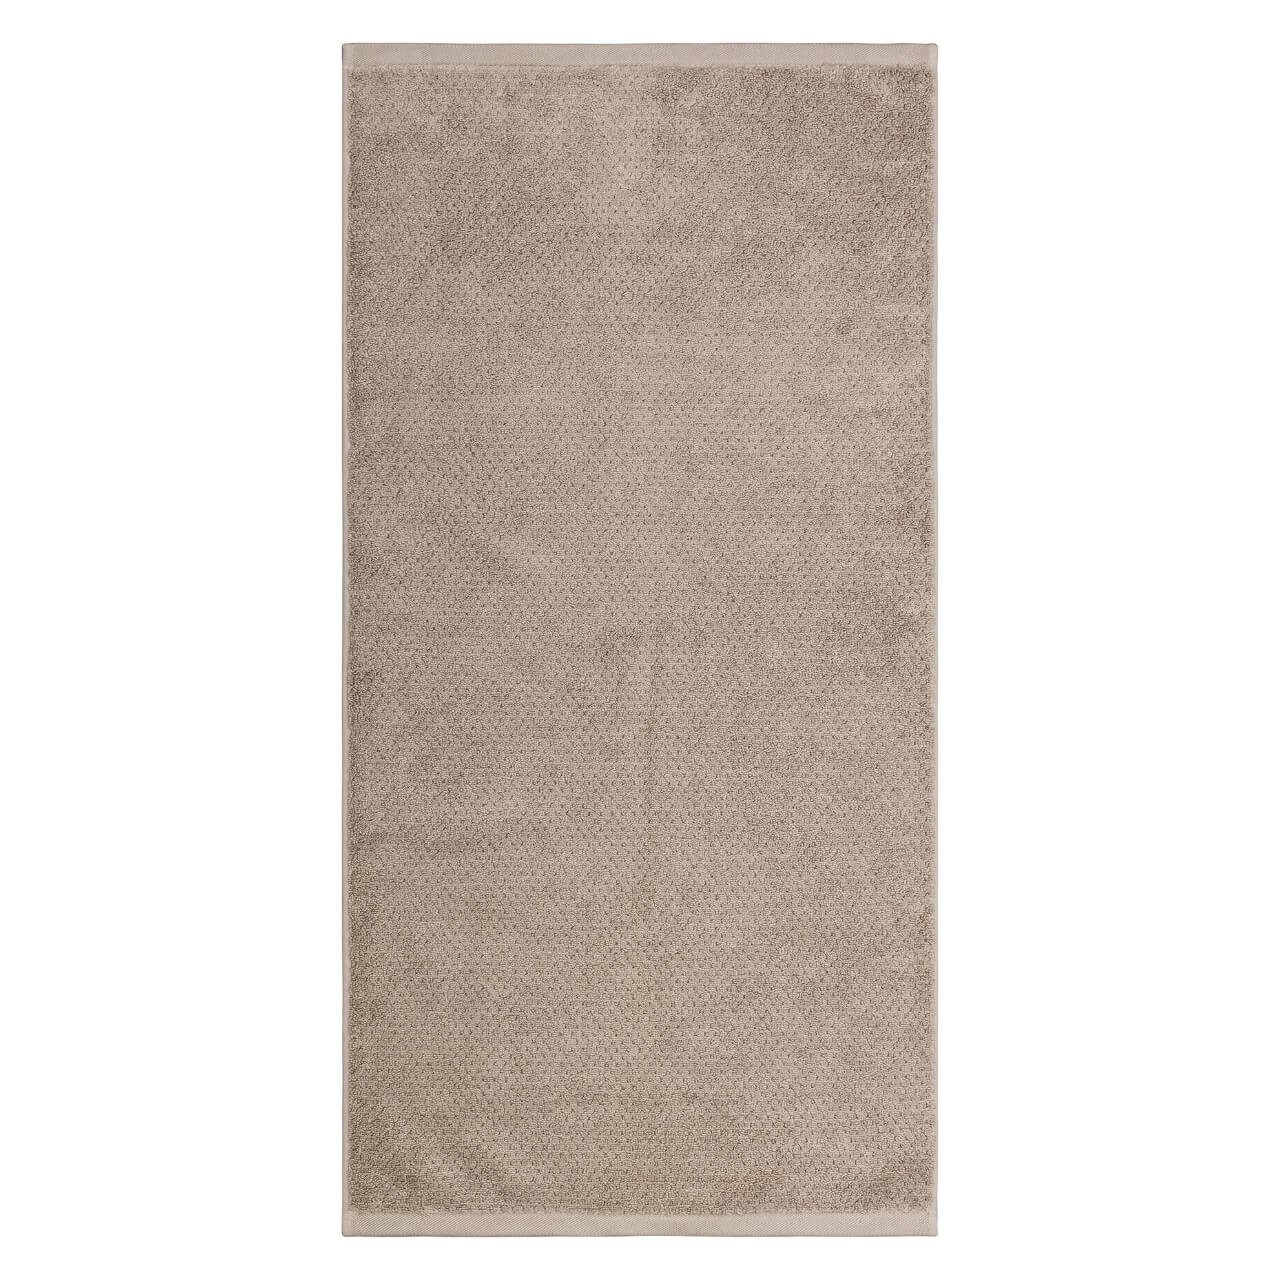 Blank Taupe Home Handtuch Bamboo